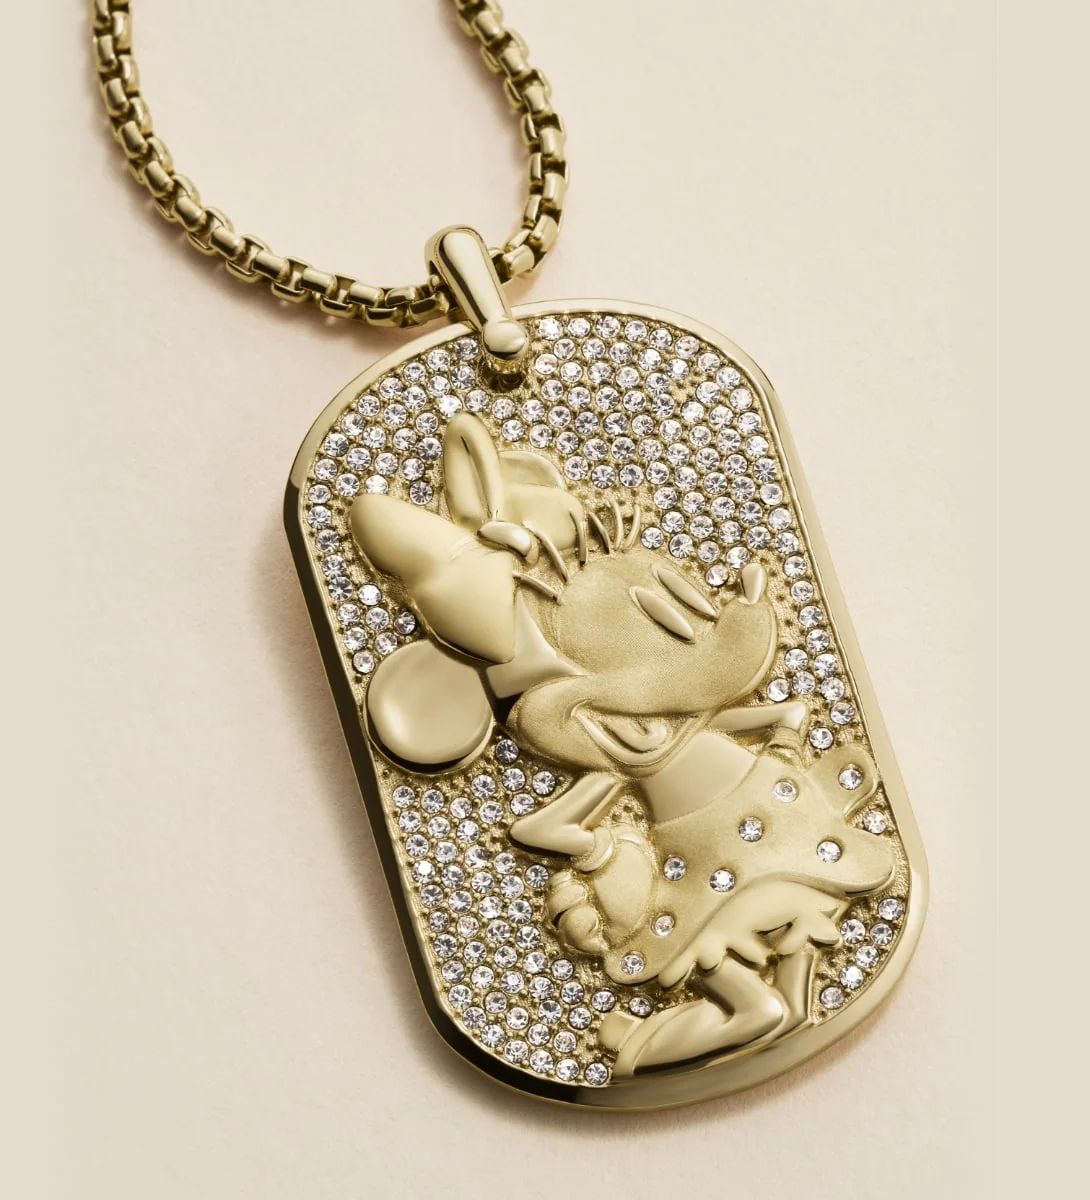 Disney x Fossil Special Edition Gold-Tone Stainless Steel Dog Tag Necklace | Fossil (US)